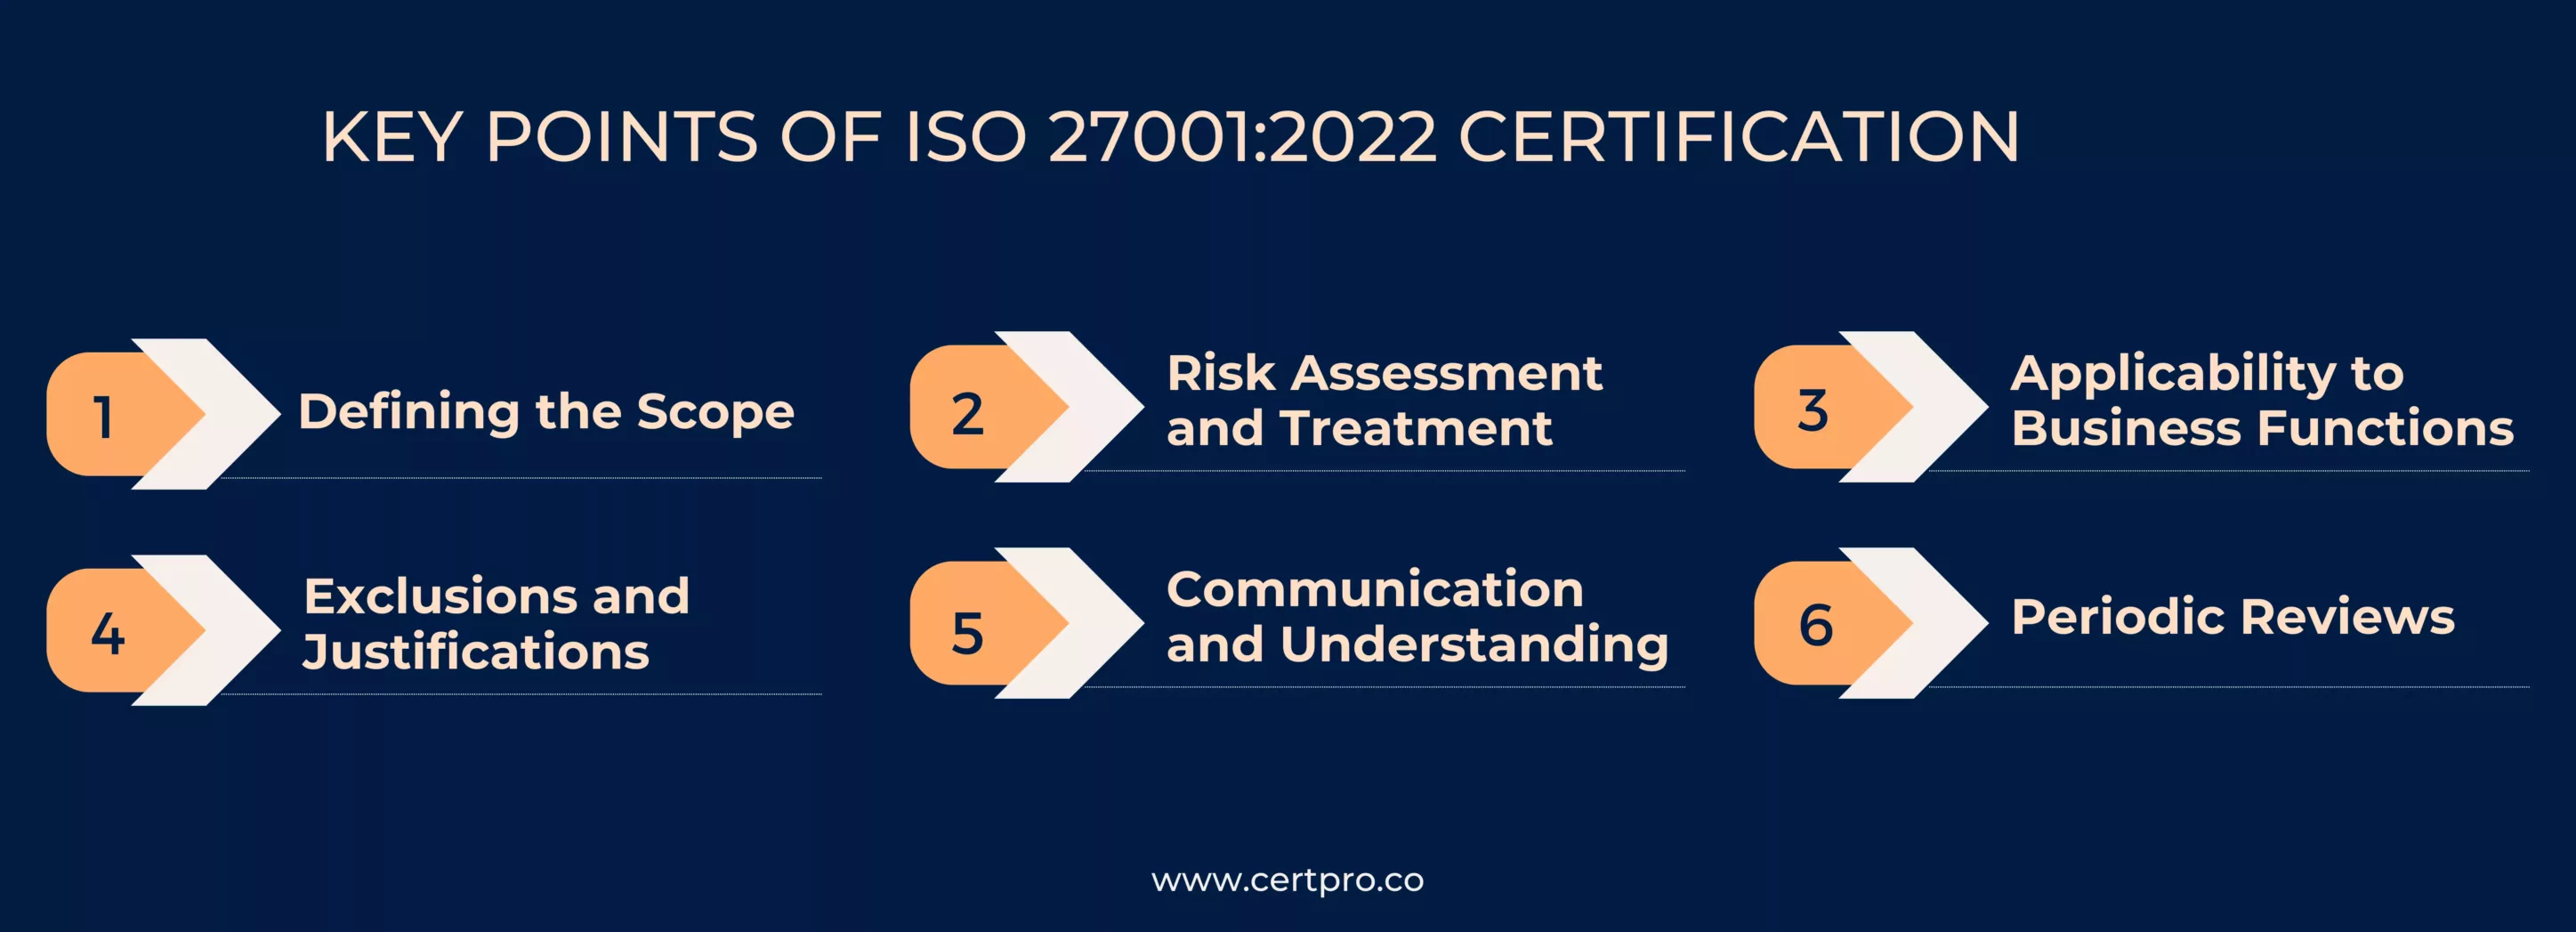 KEY POINTS OF ISO 27001-2022 CERTIFICATION